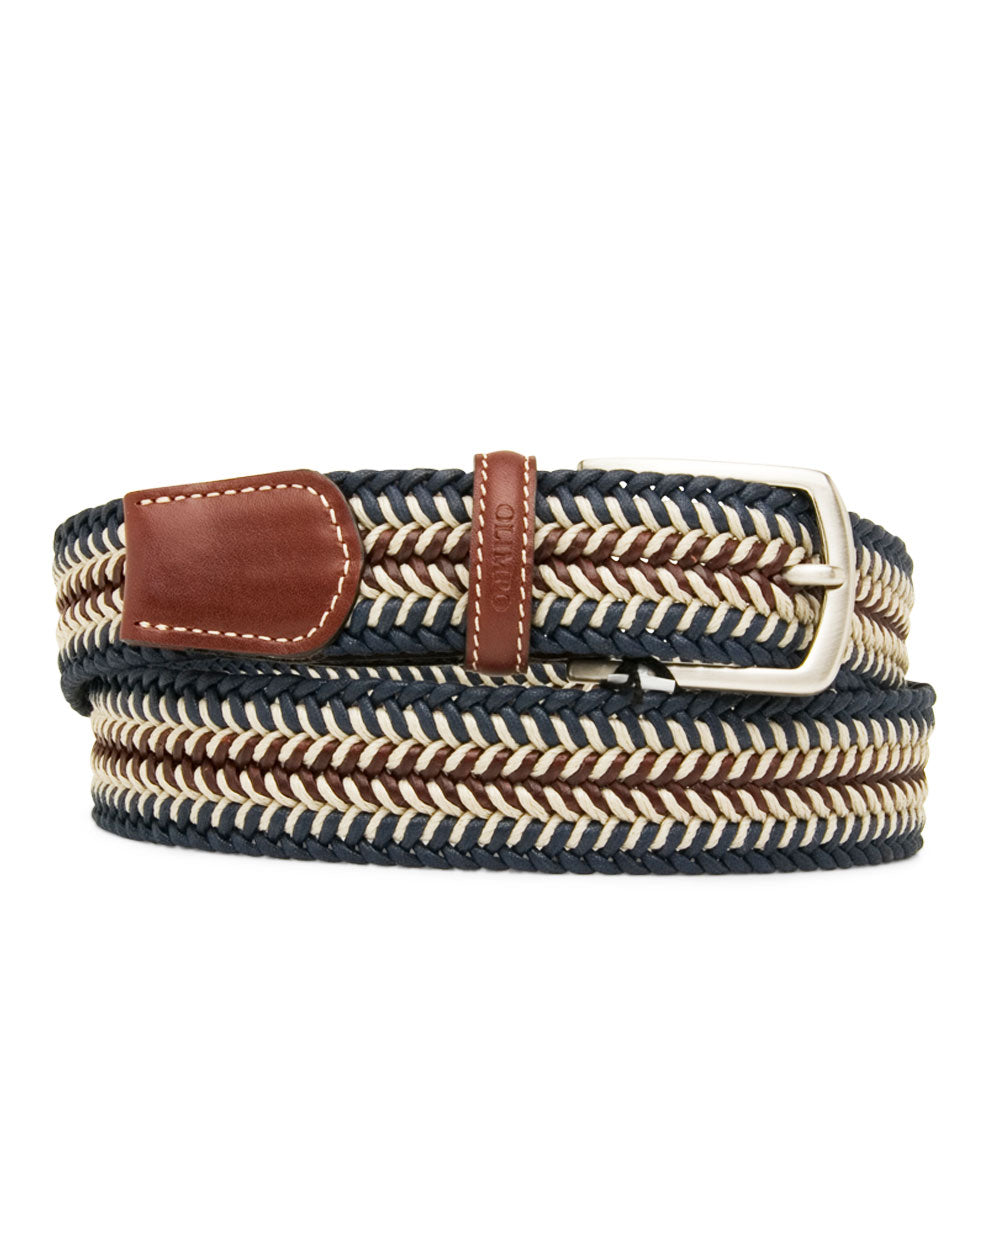 Braided Leather Belt in Navy and Beige